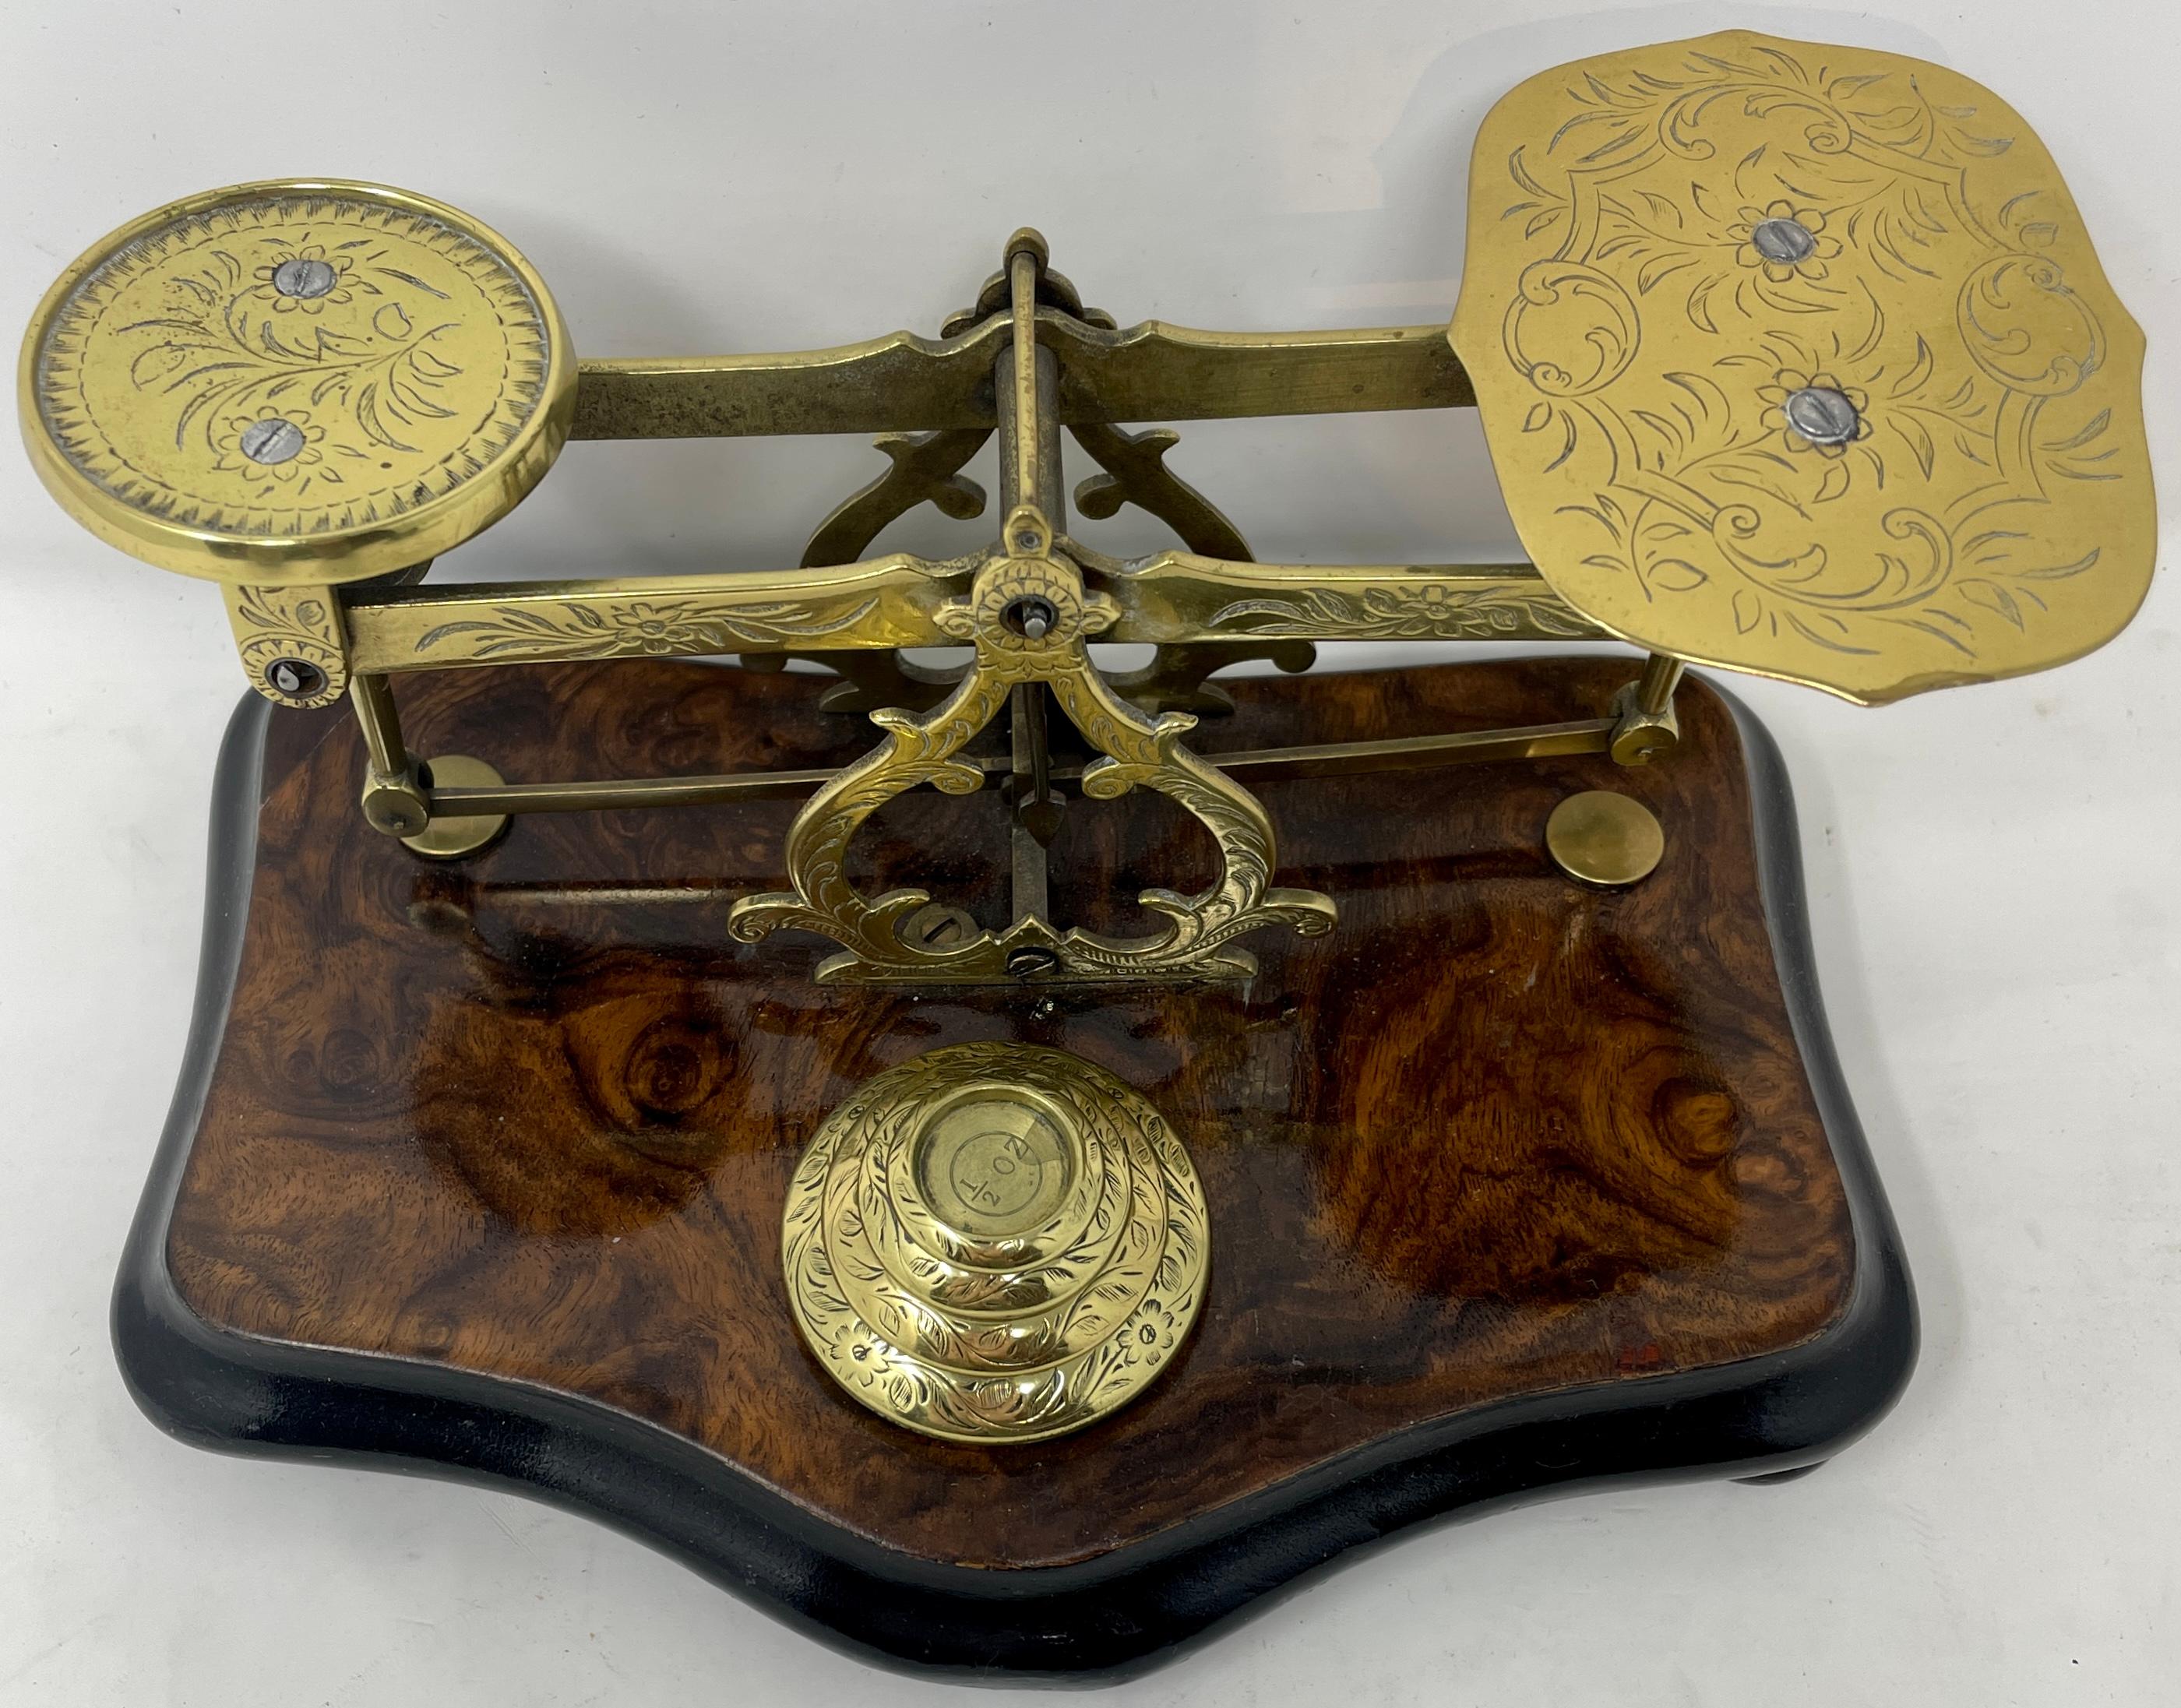 Antique English walnut and brass engraved postal scale, circa 1860.